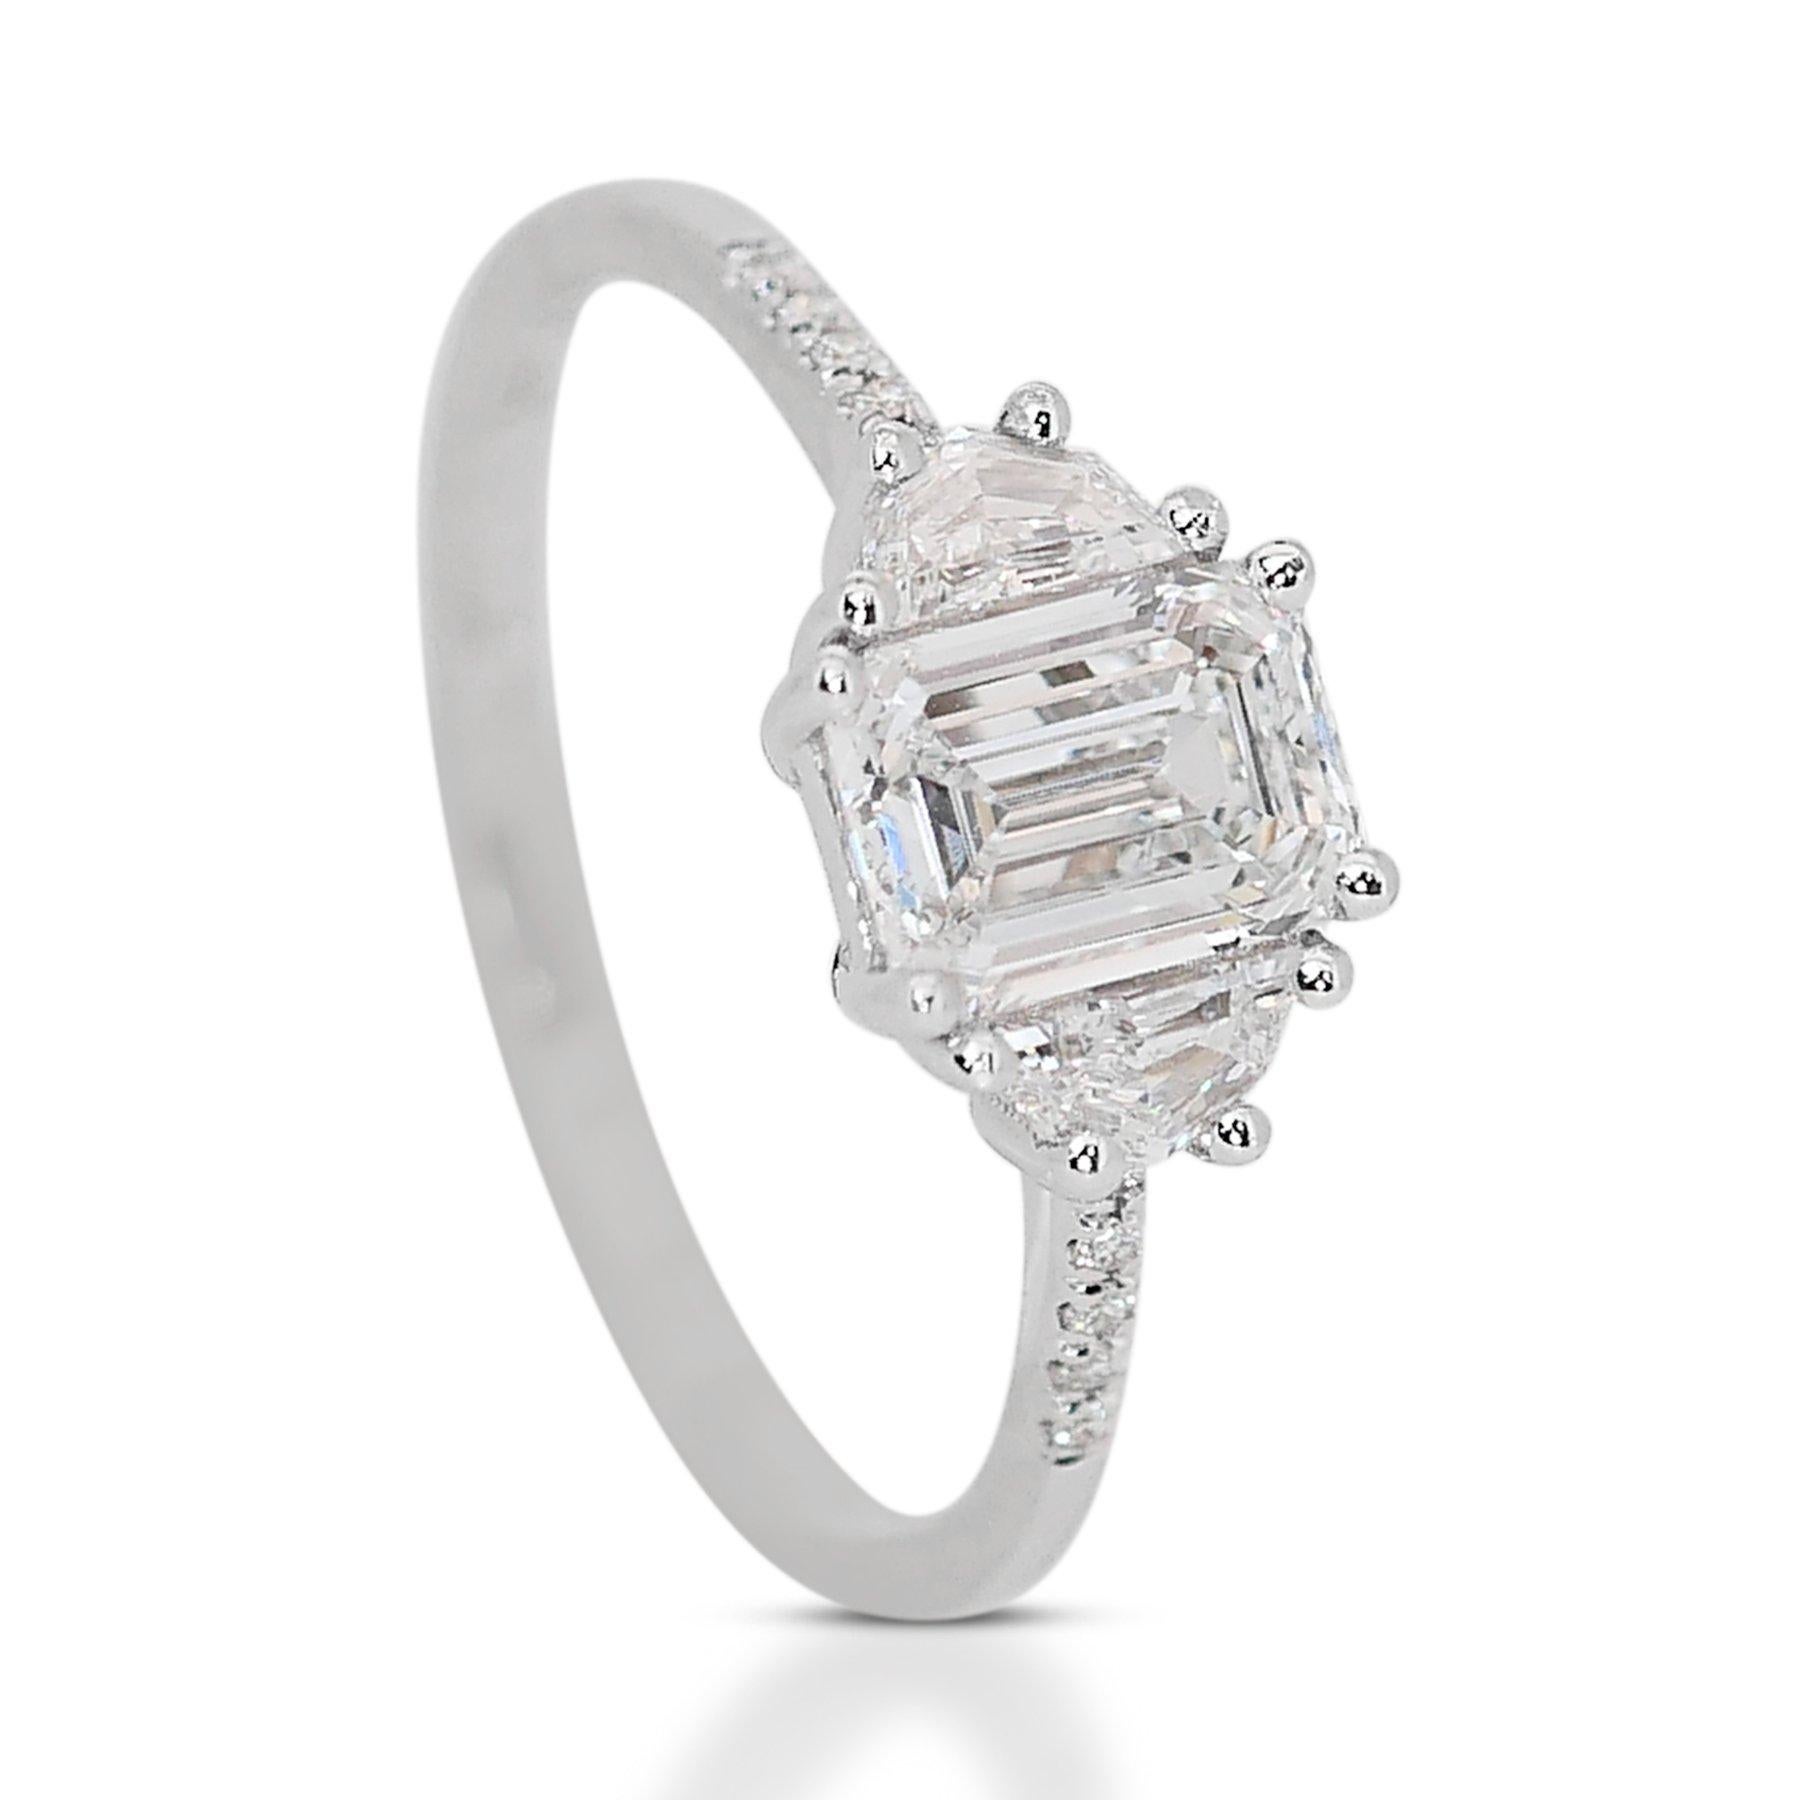 Luxurious 1.20ct Diamond 3-Stone Ring with Cadillac Shield & Round Accents in 18k White Gold - GIA Certified 

This meticulously crafted diamond ring in 18k white gold epitomizes elegance and sophistication. At the center, a 0.84-carat emerald-cut